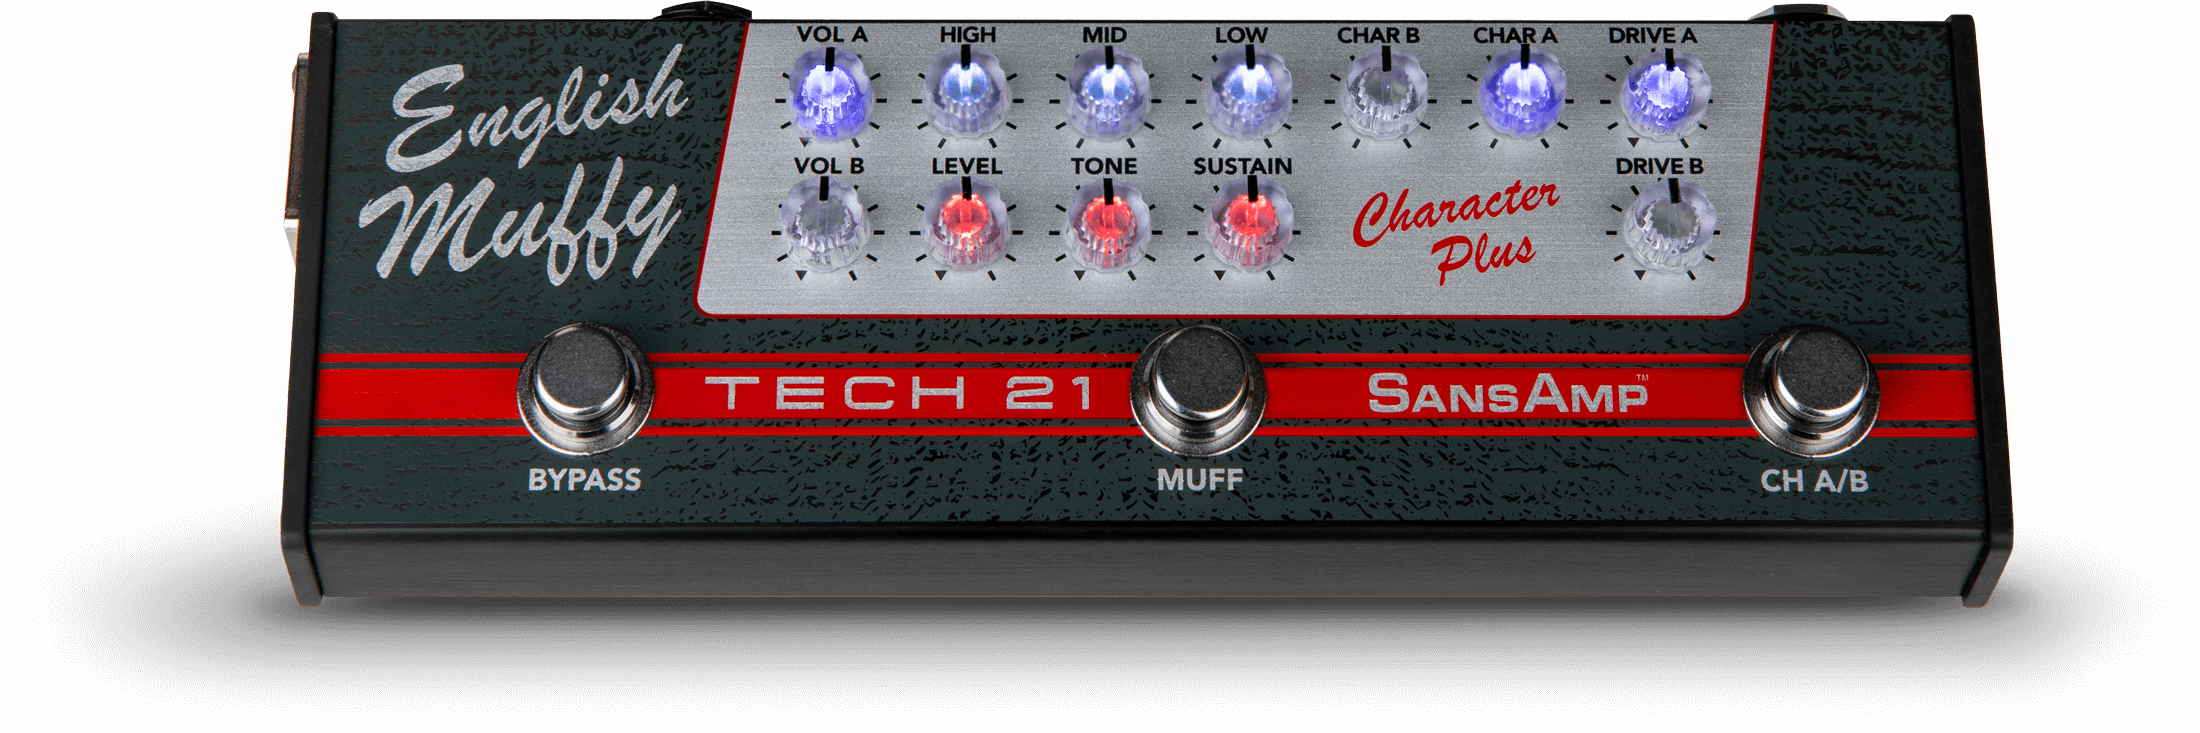 Tech 21 product image of the English Muffy pedal from the SansAmp Character Plus Series